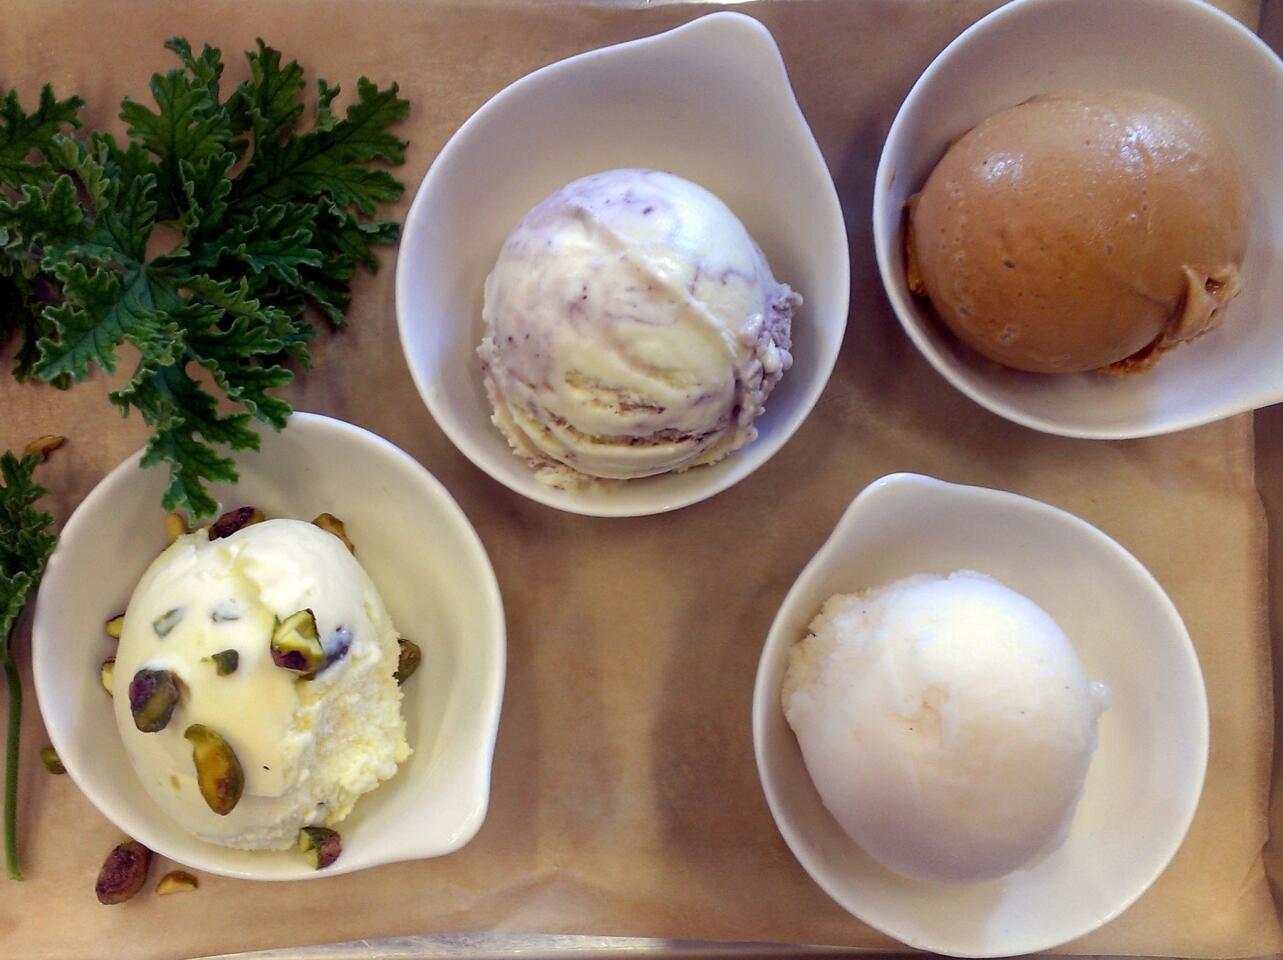 A few of the ice cream flavors at the Sweet Rose Creamery in Santa Monica, from left, include: rose geranium with salty pistachio; creme fraiche with elderberry and pink peppercorn swirl; salted caramel; and pear Riesling sorbet.